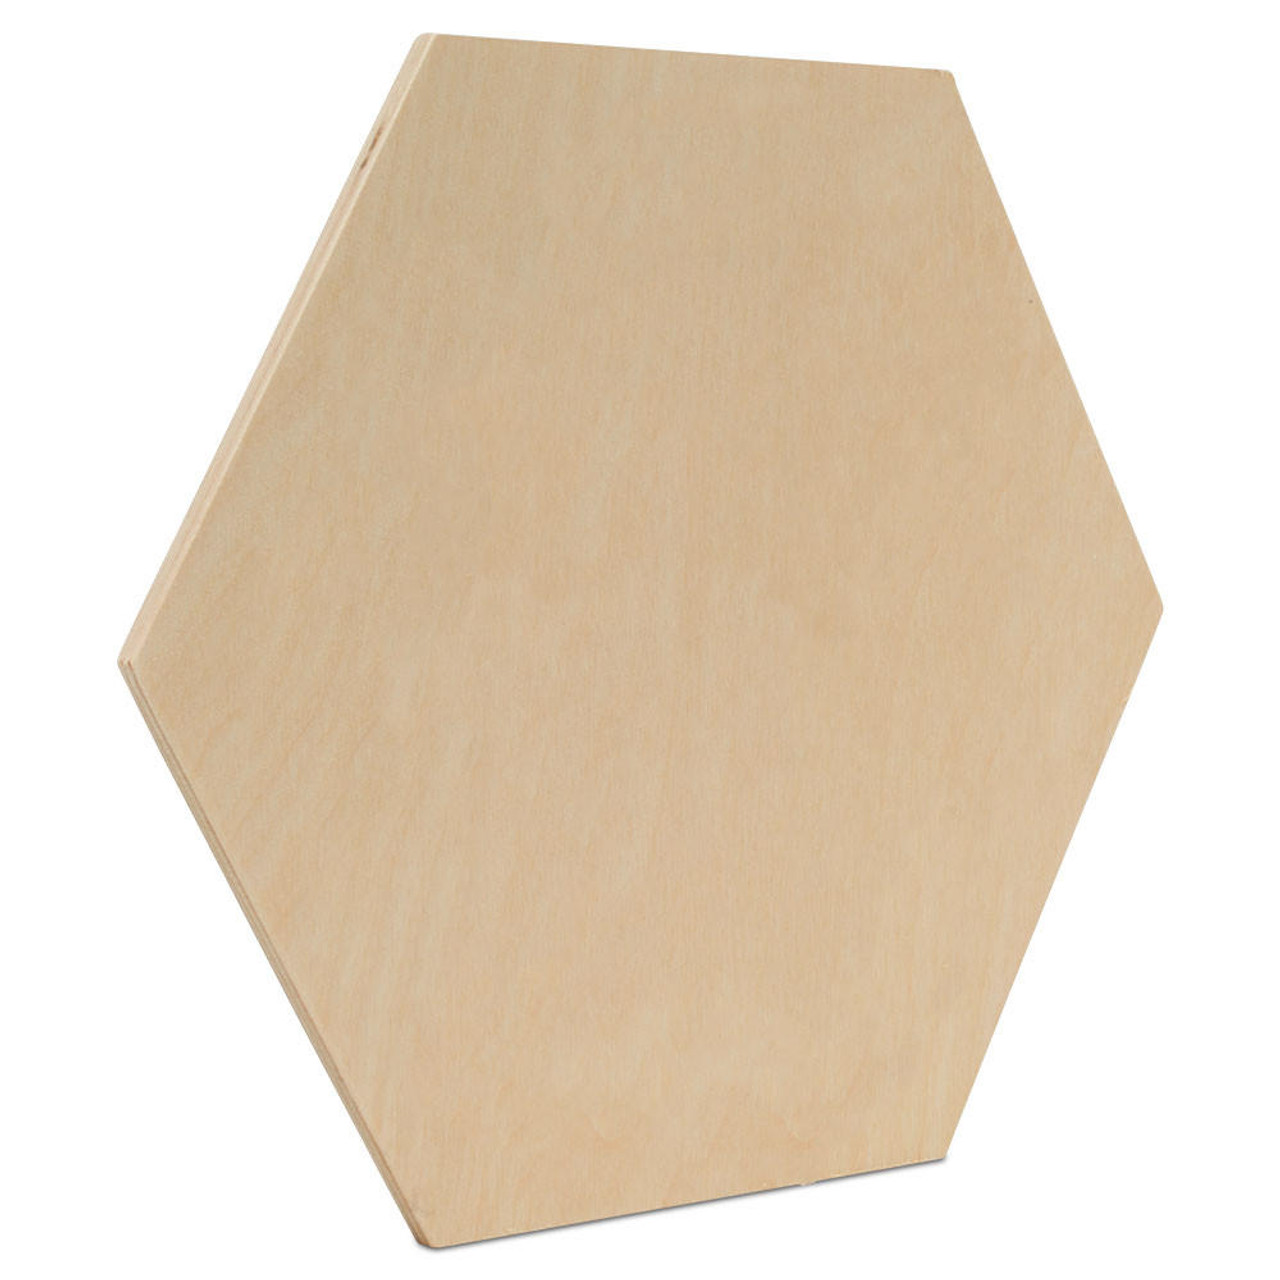 High-Quality hexagon wood for Decoration and More 